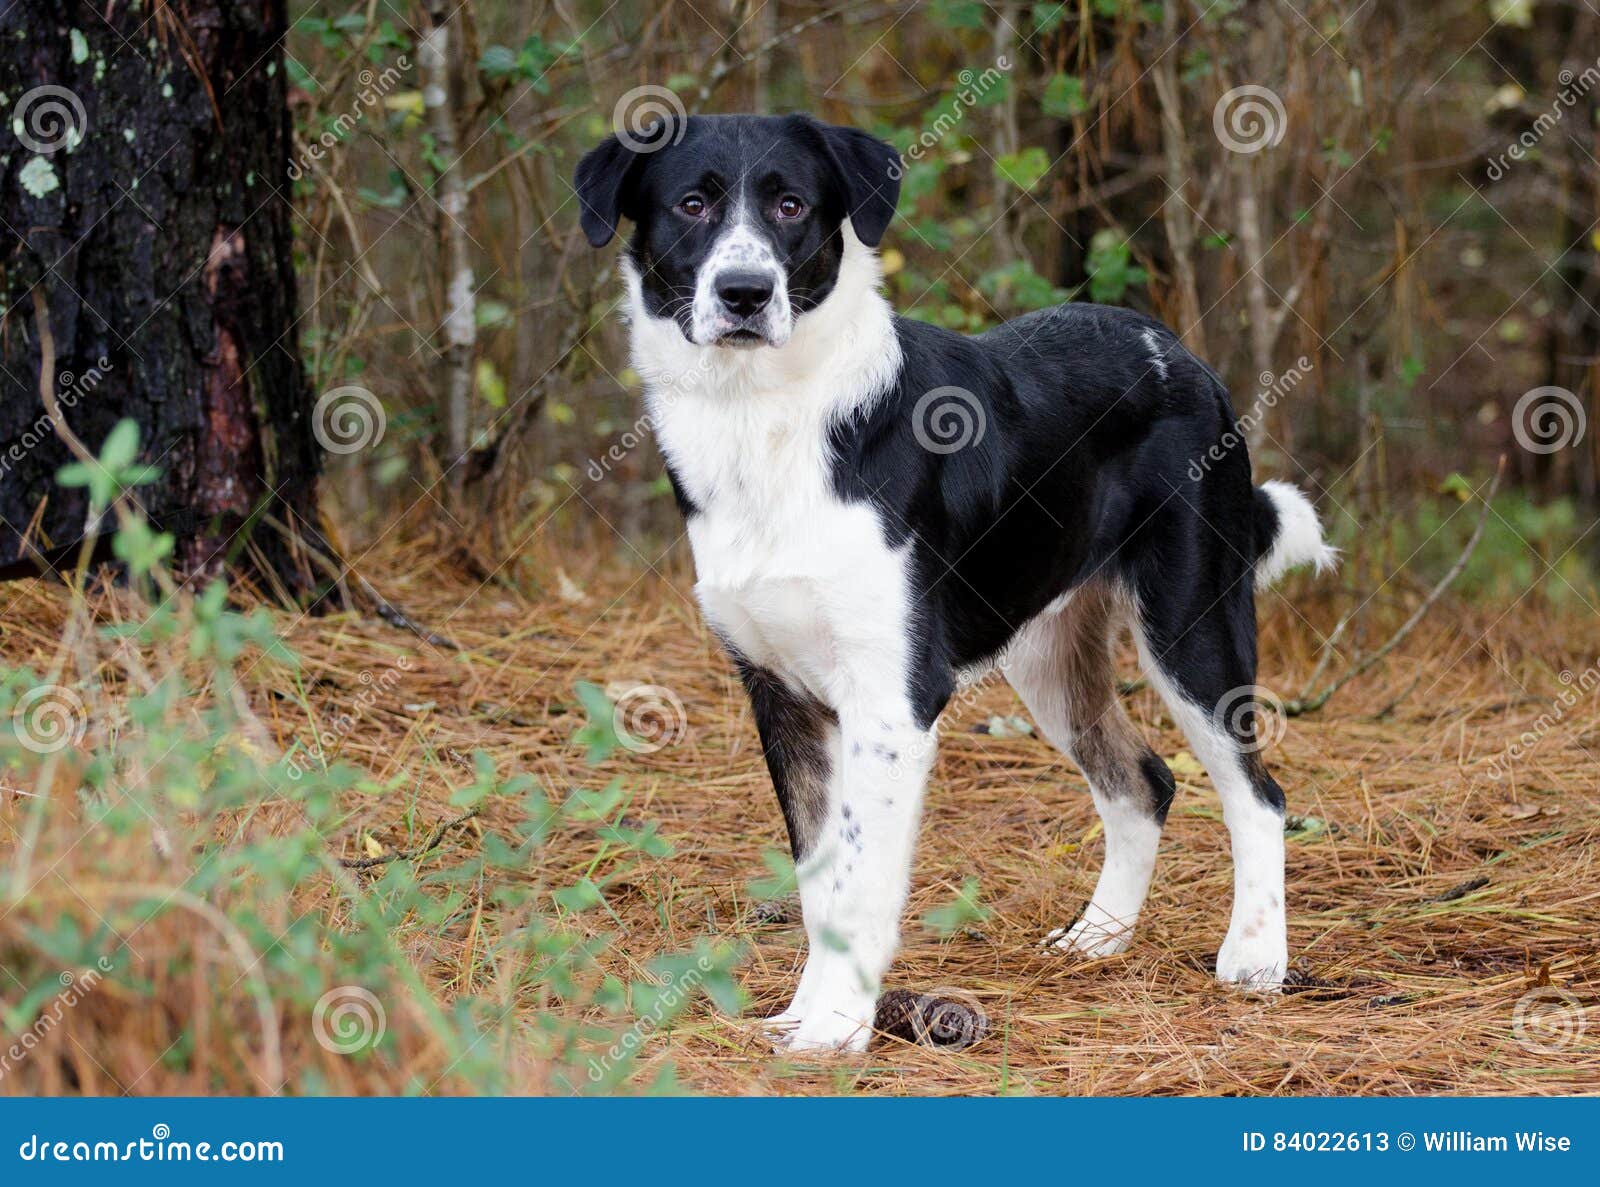 45+ Border Collie Mix Brown And Black